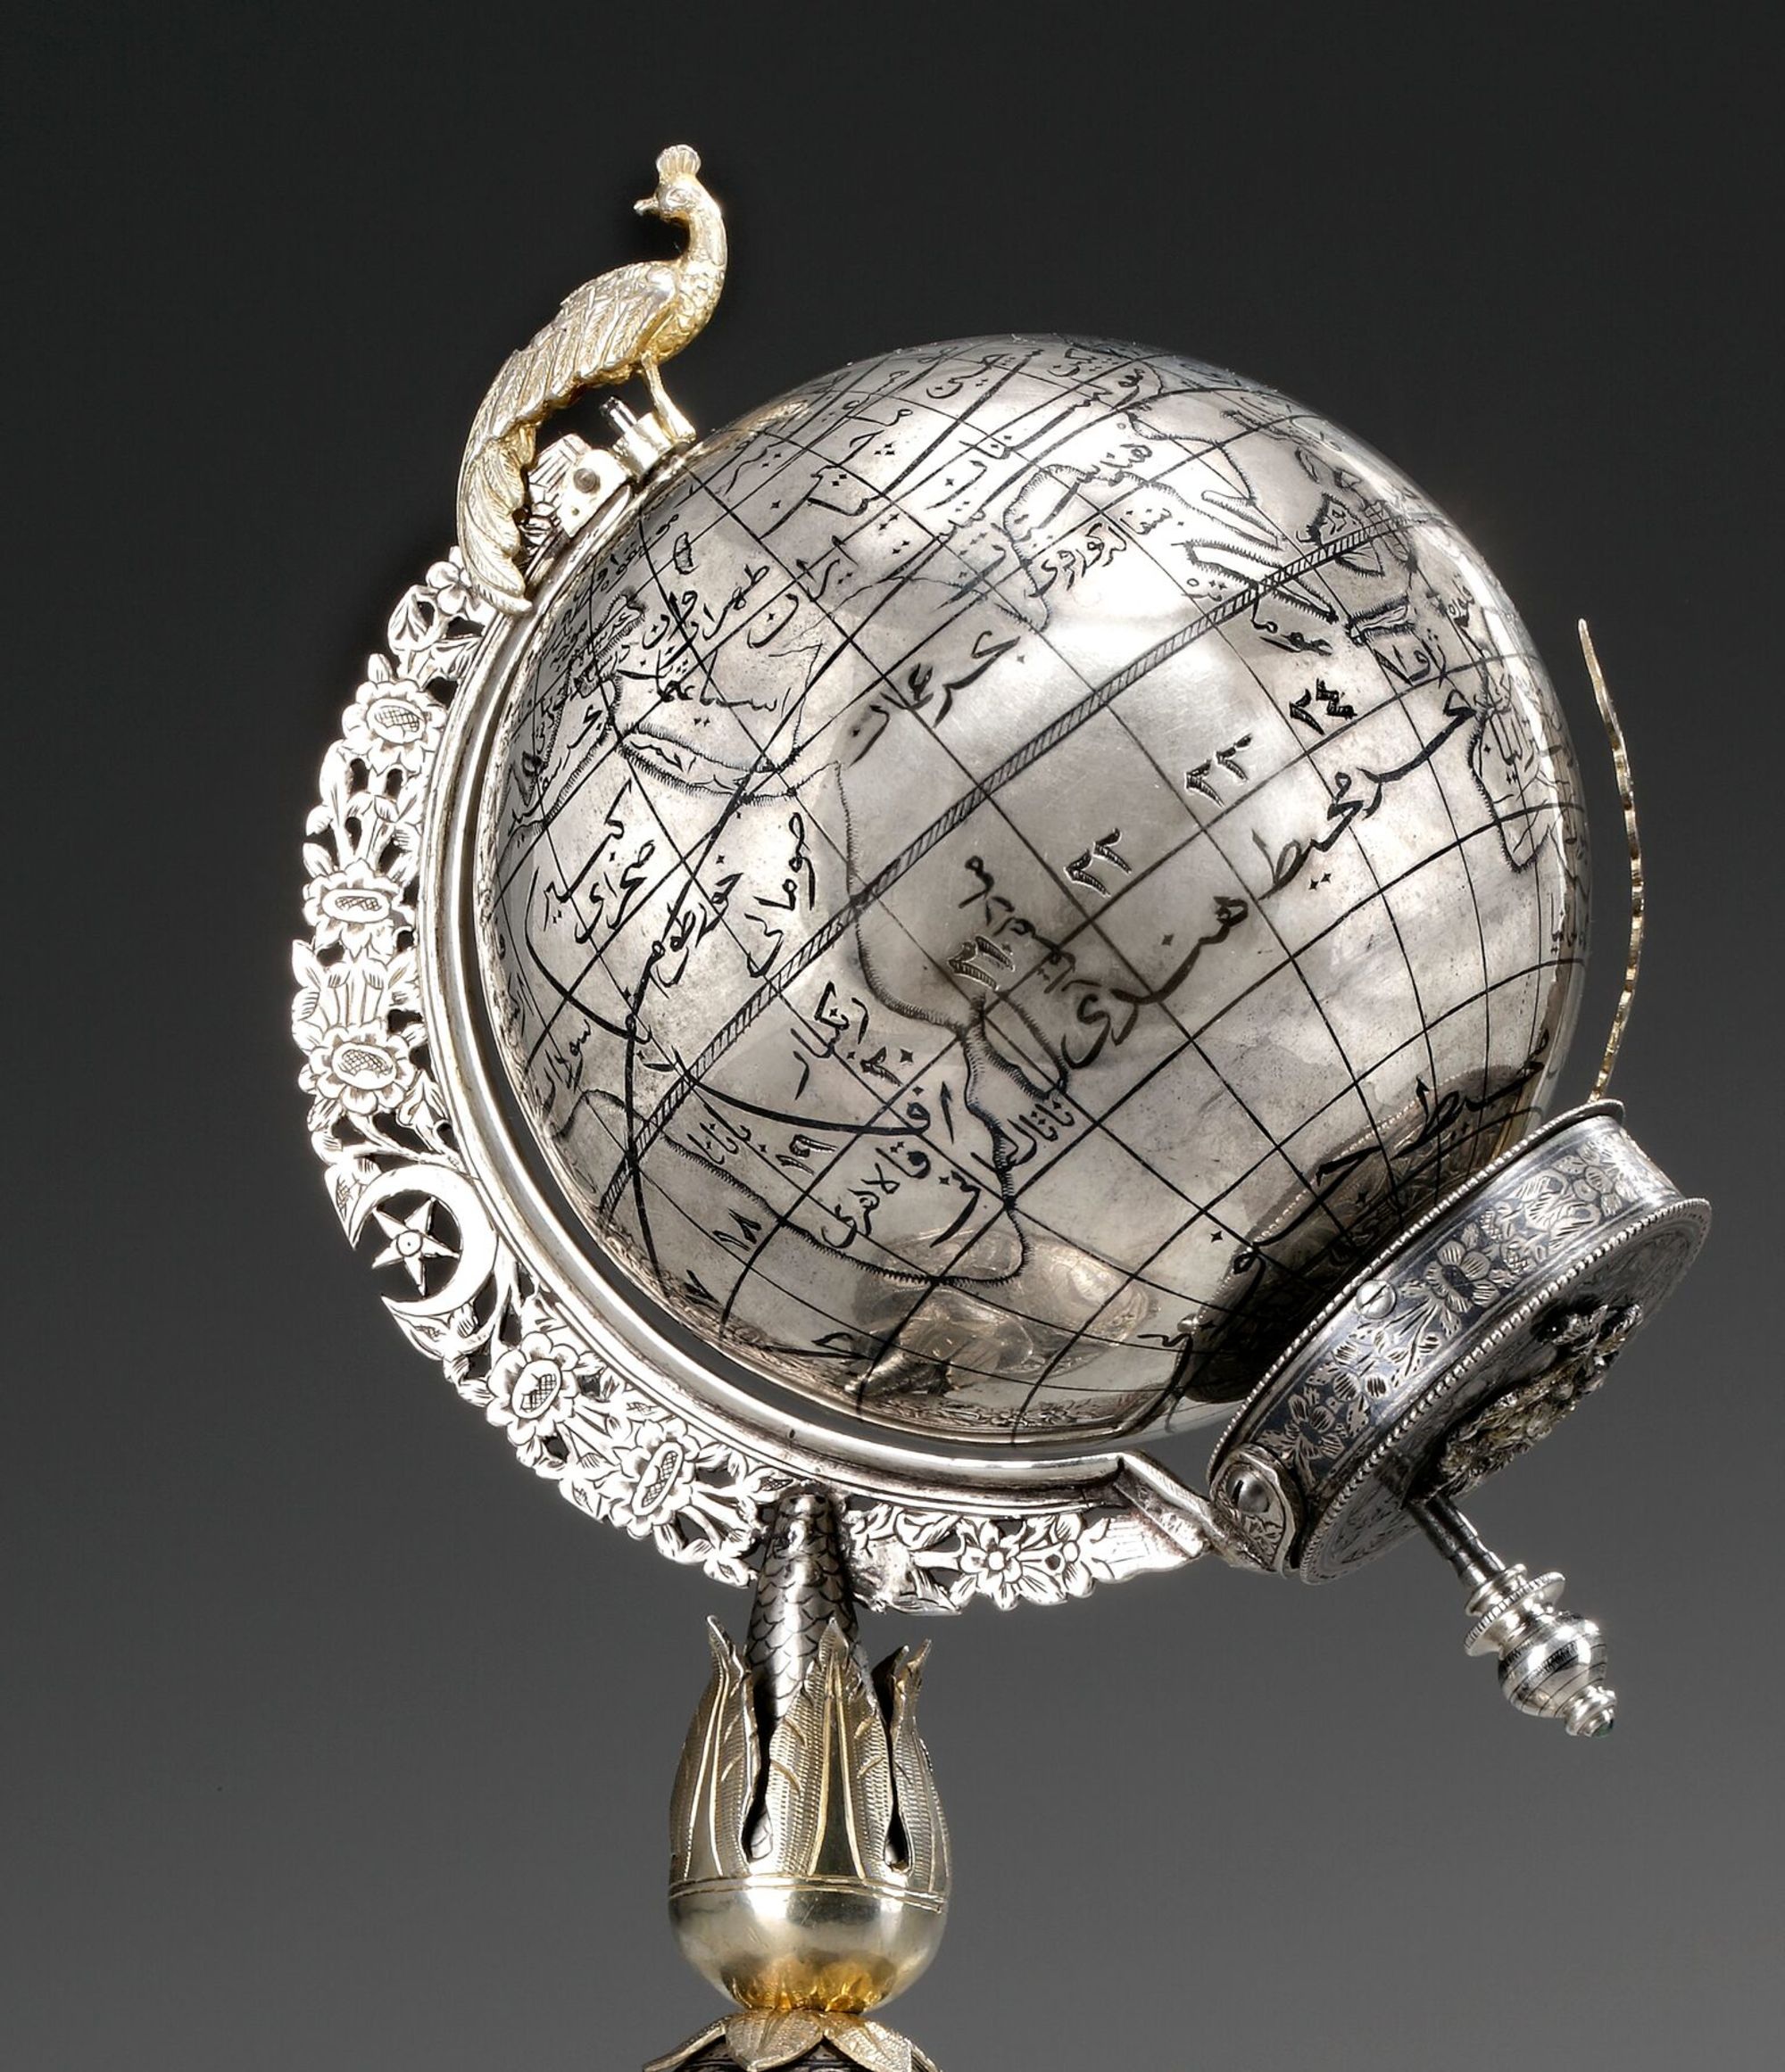 AN OTTOMAN SILVER, NIELLOED AND ENGRAVED GLOBE CLOCK BEARING THE TUGHRA OF SULTAN ABDULHAMID II TURK - Image 10 of 18